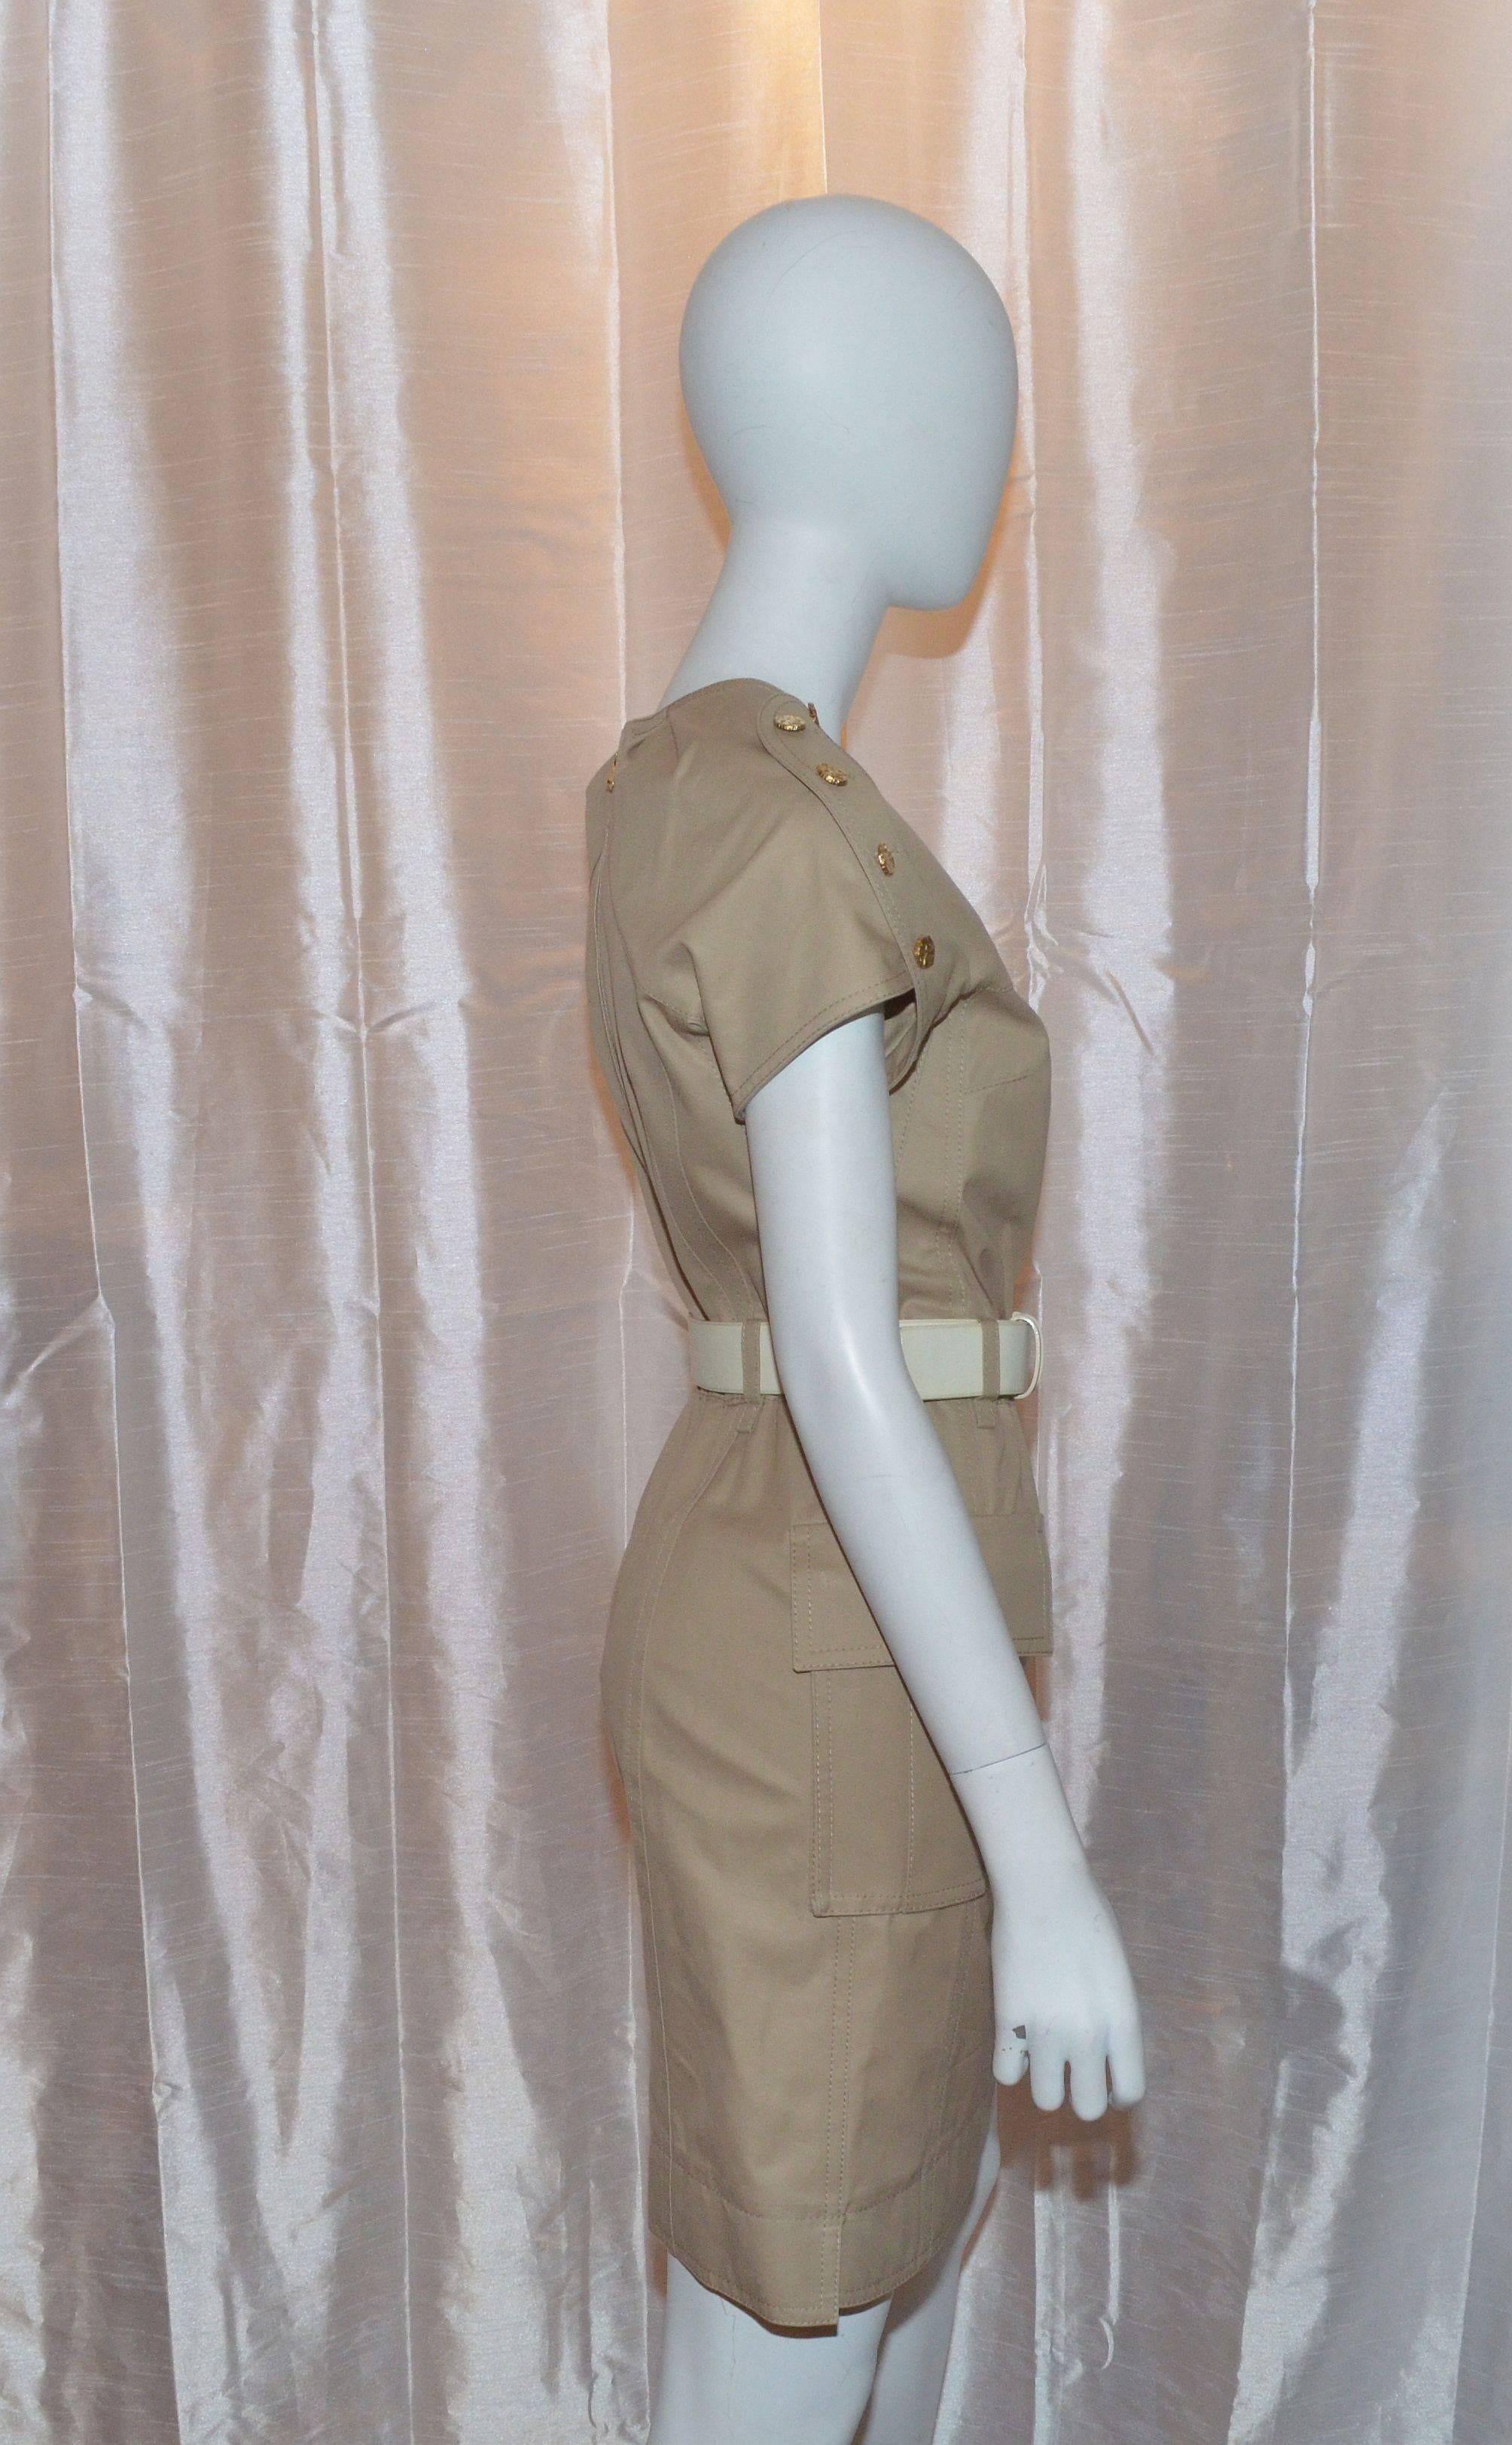 Louis Vuitton Resort 2009 Safari Khaki Belted Dress

Dress is100% cotton, size 36, and made in France. Features a back zipper closure with a gold-tone zipper pull, decorative gold-tone nugget buttons at the shoulders, patch flap pockets at the